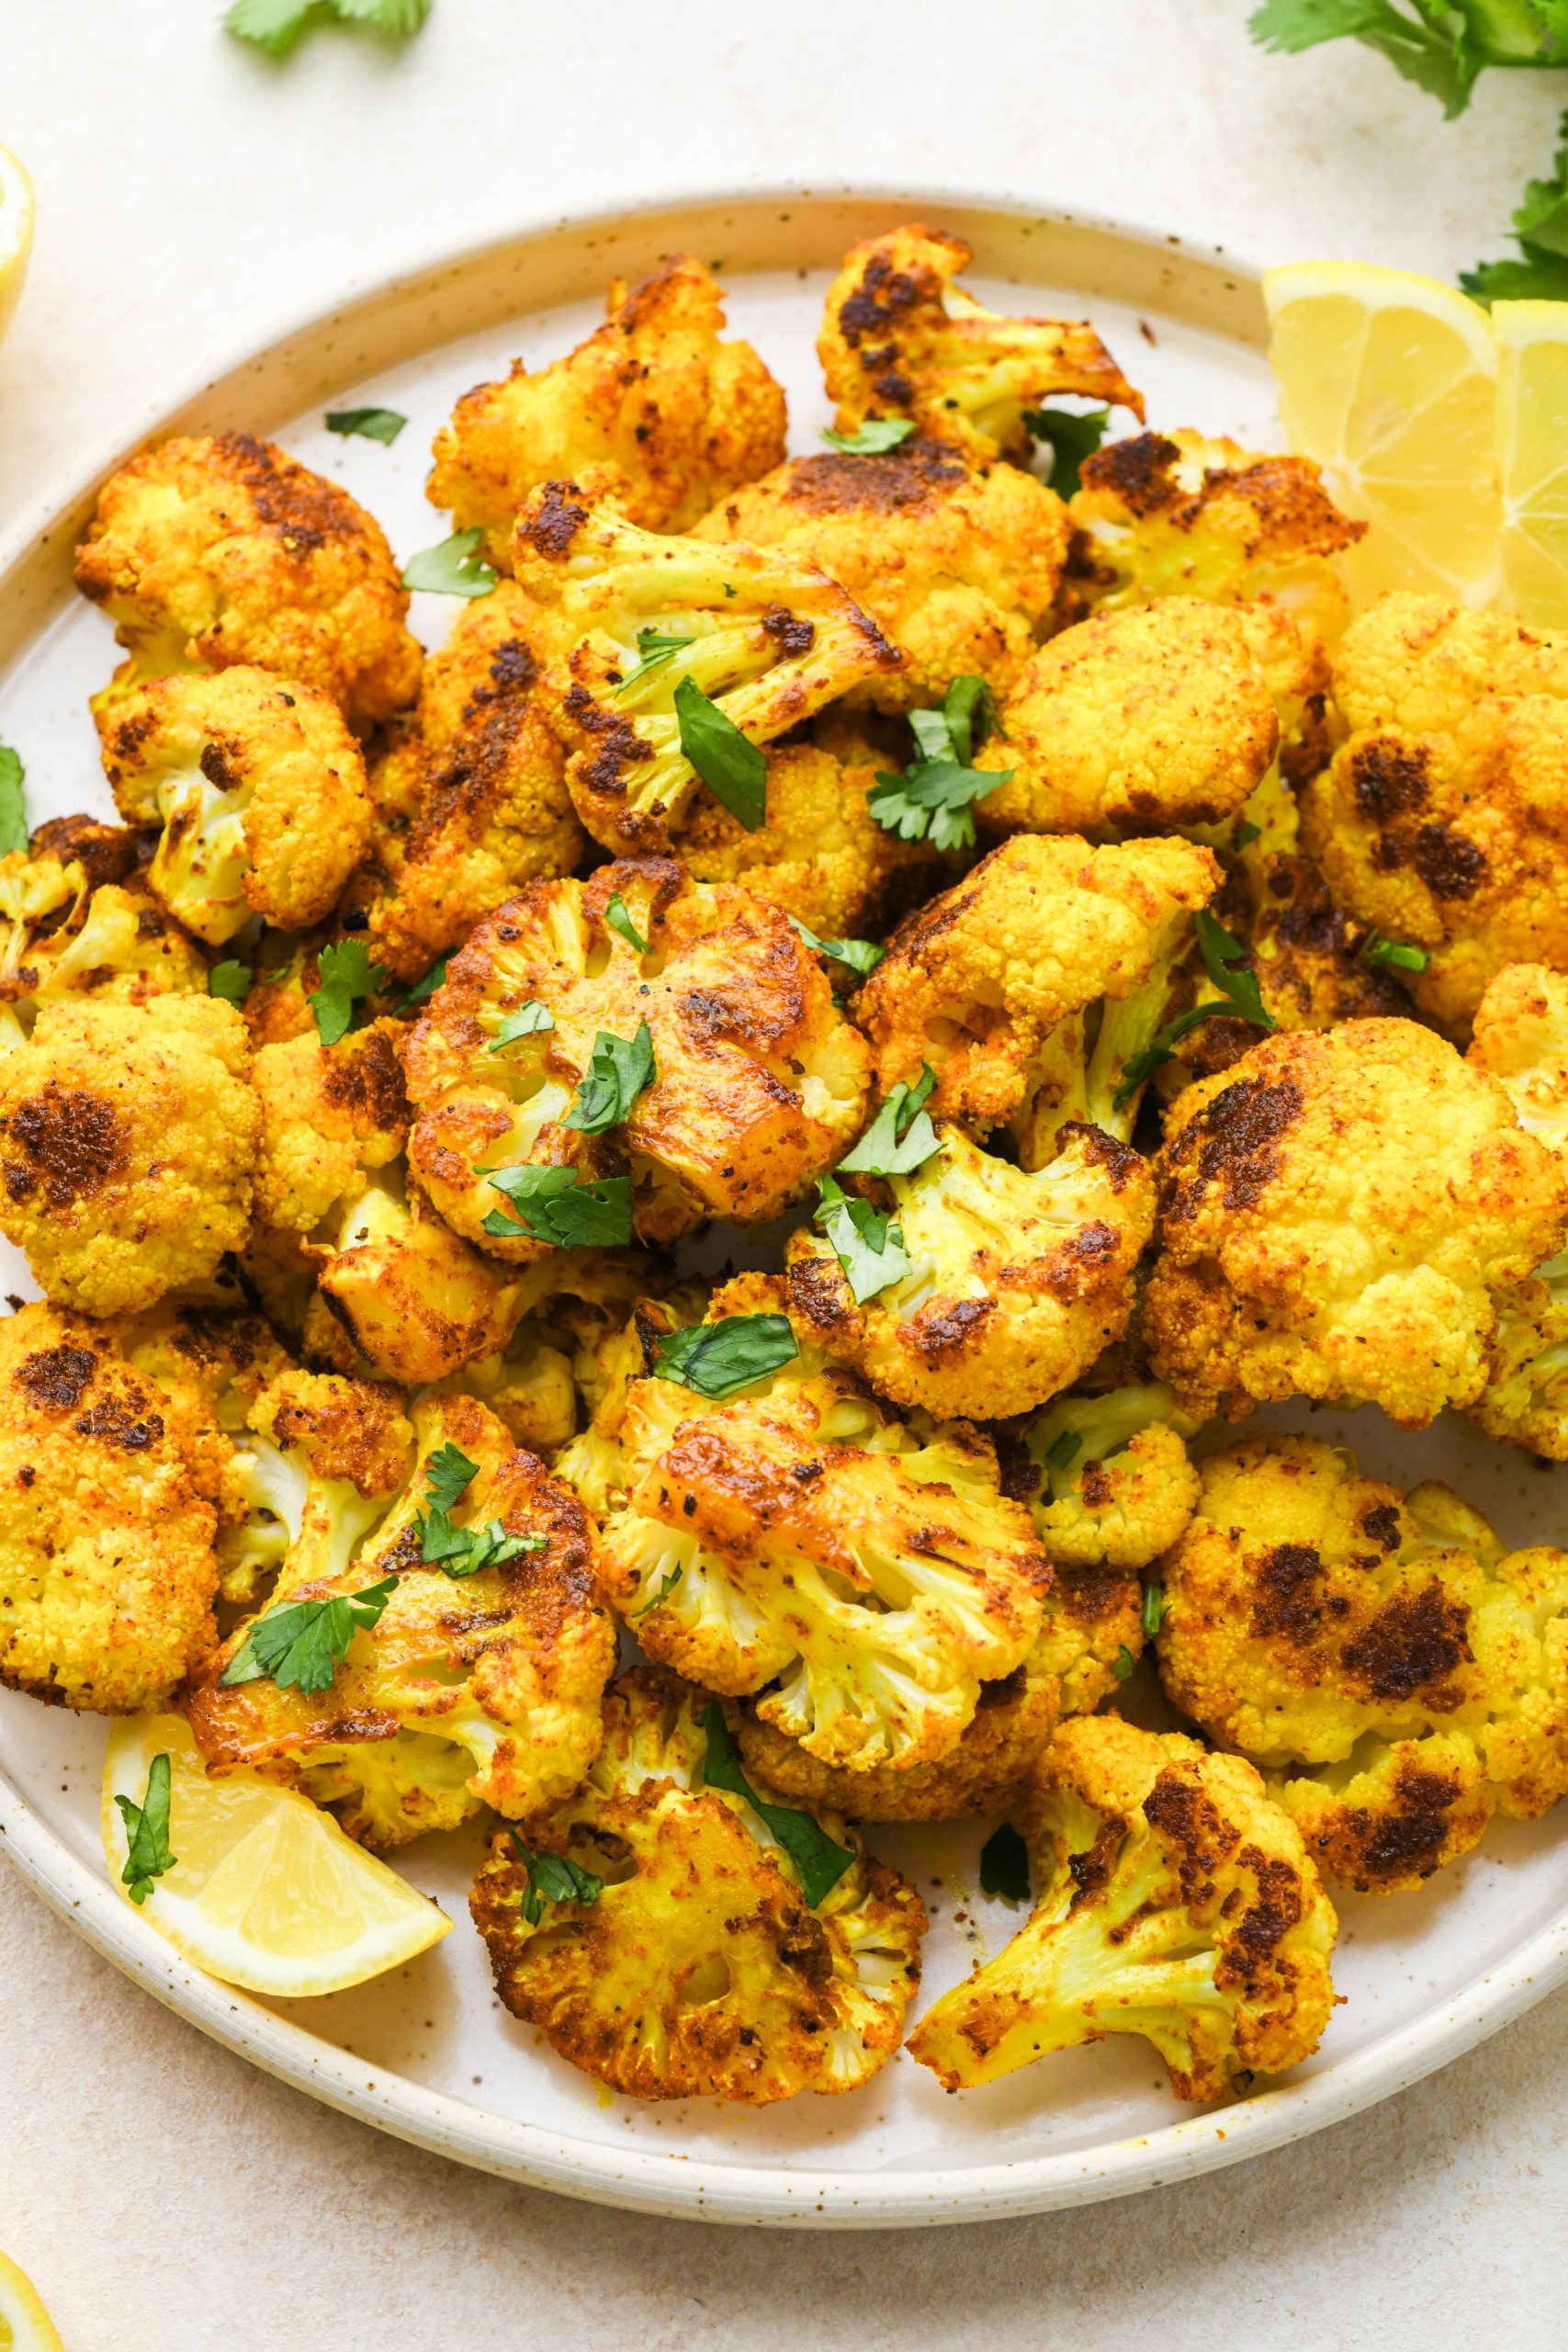 Turmeric roasted cauliflower on a speckled ceramic plate topped with fresh herbs.